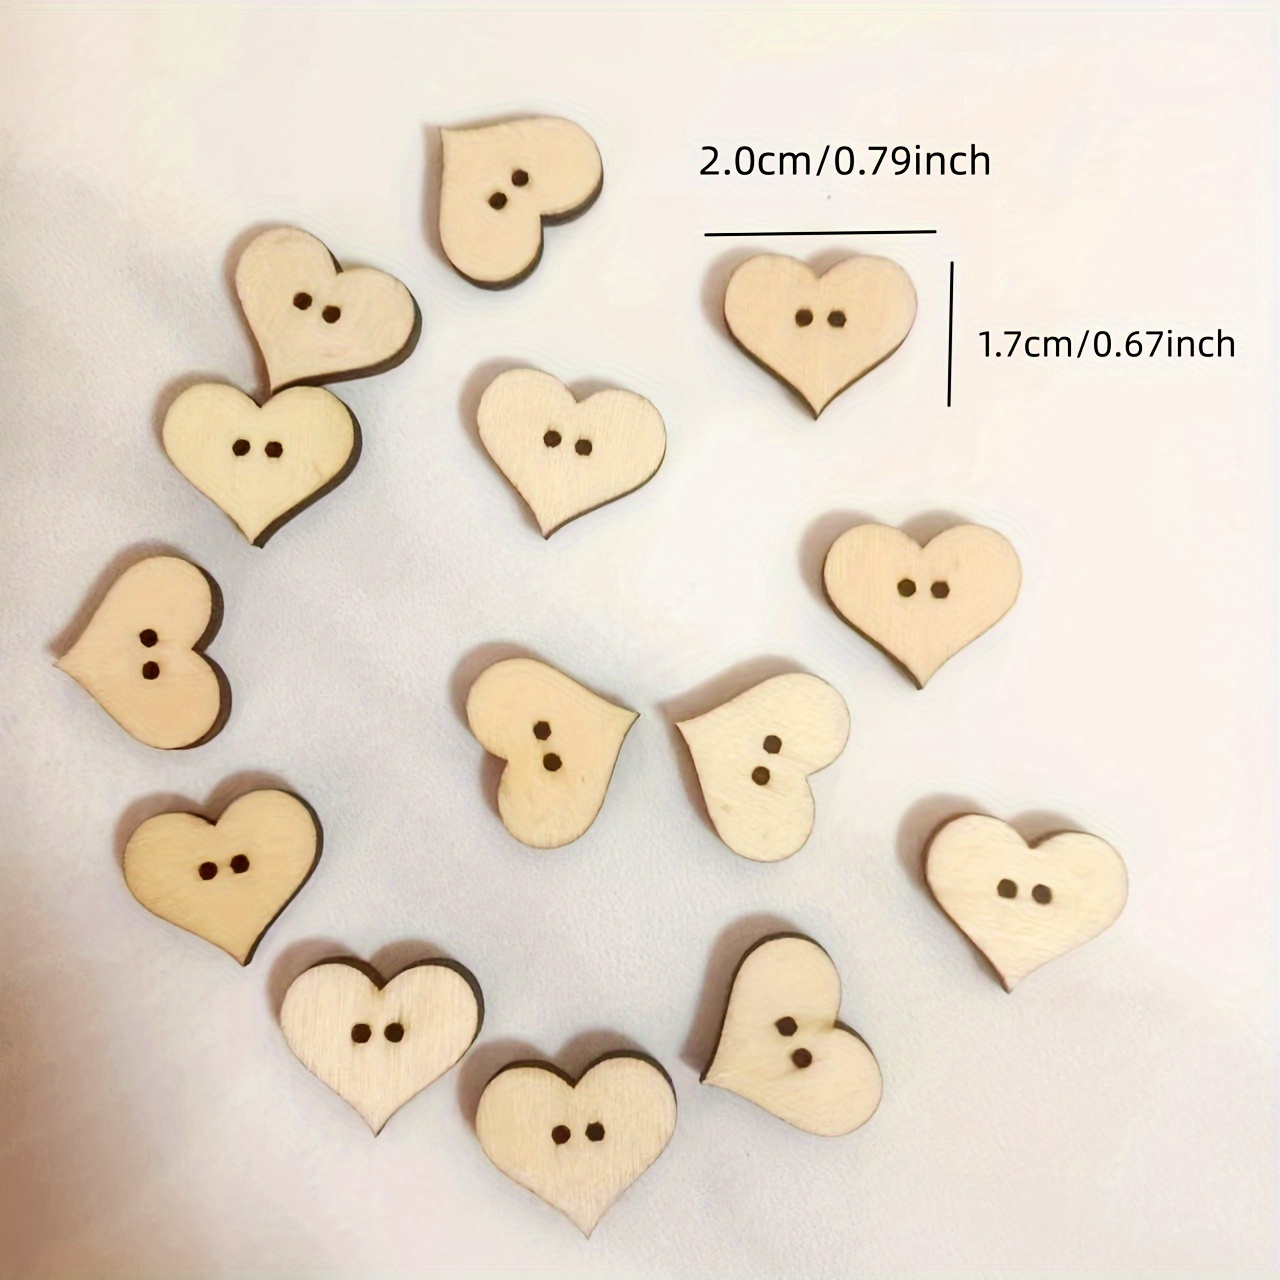 50pcs Wooden Heart-Shaped Buttons, Wooden Vintage Buttons For Clothing  Sewing, Craft, And DIY Projects & More